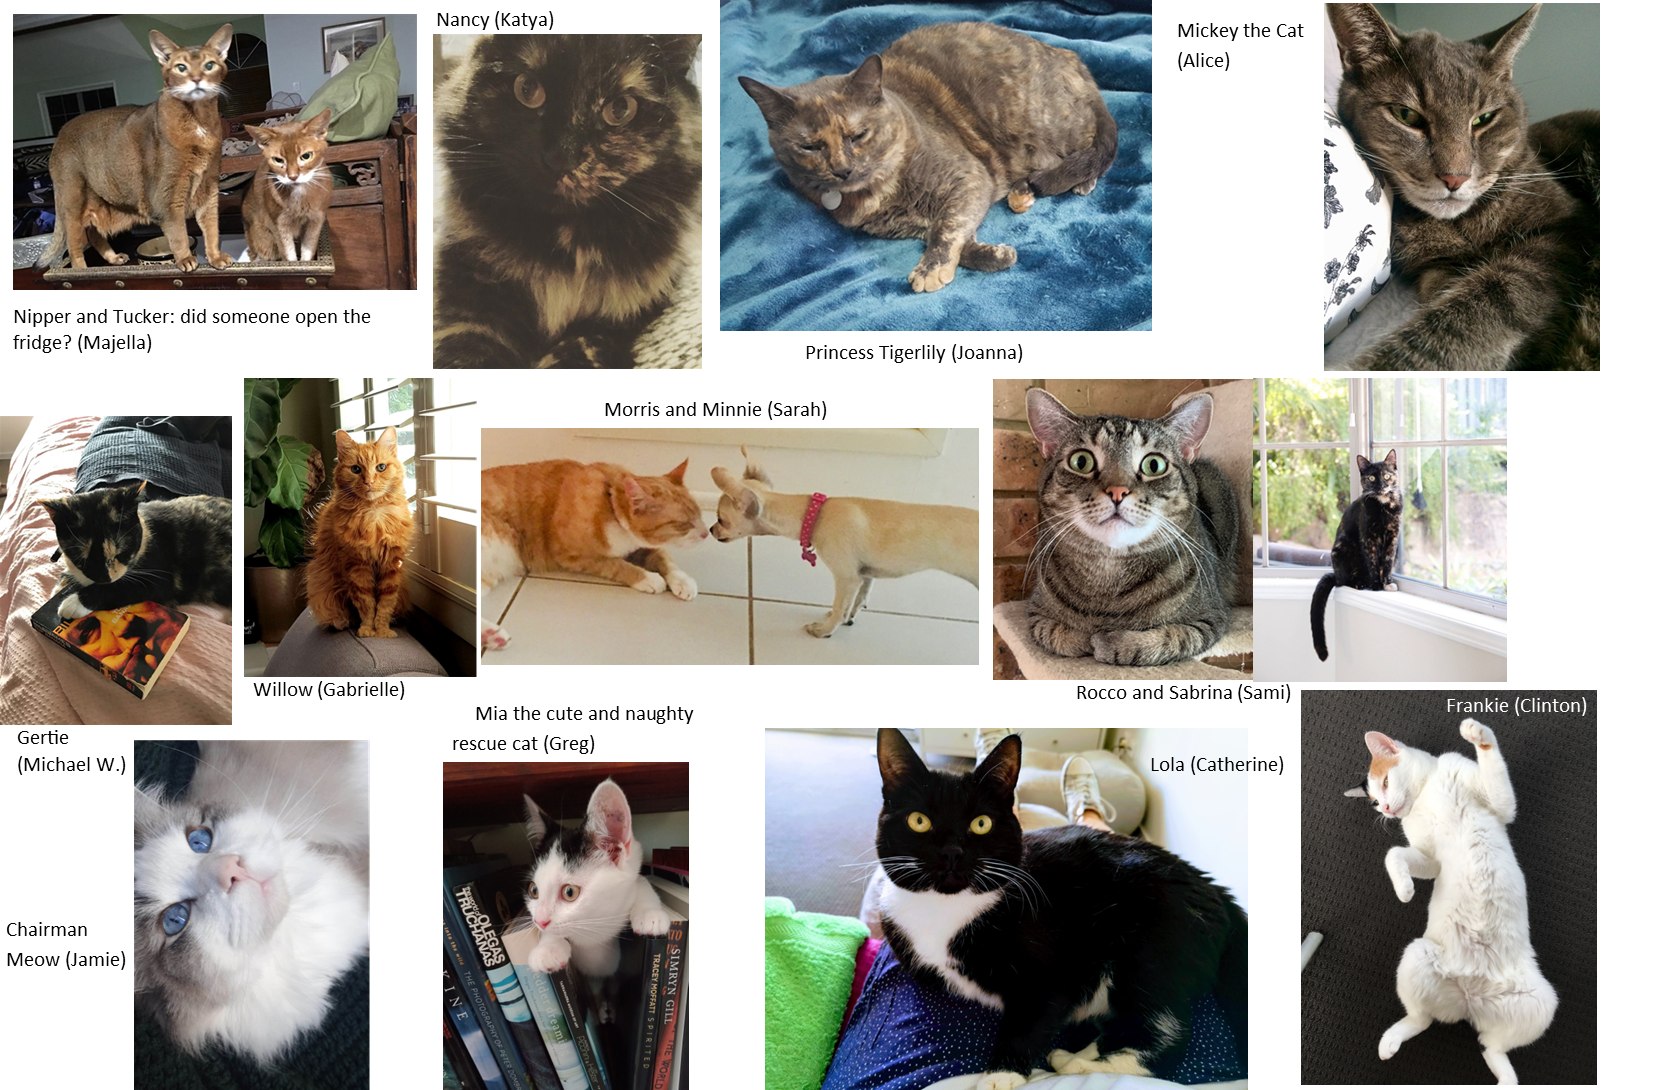 13 cats of various shapes, colours and sizes.